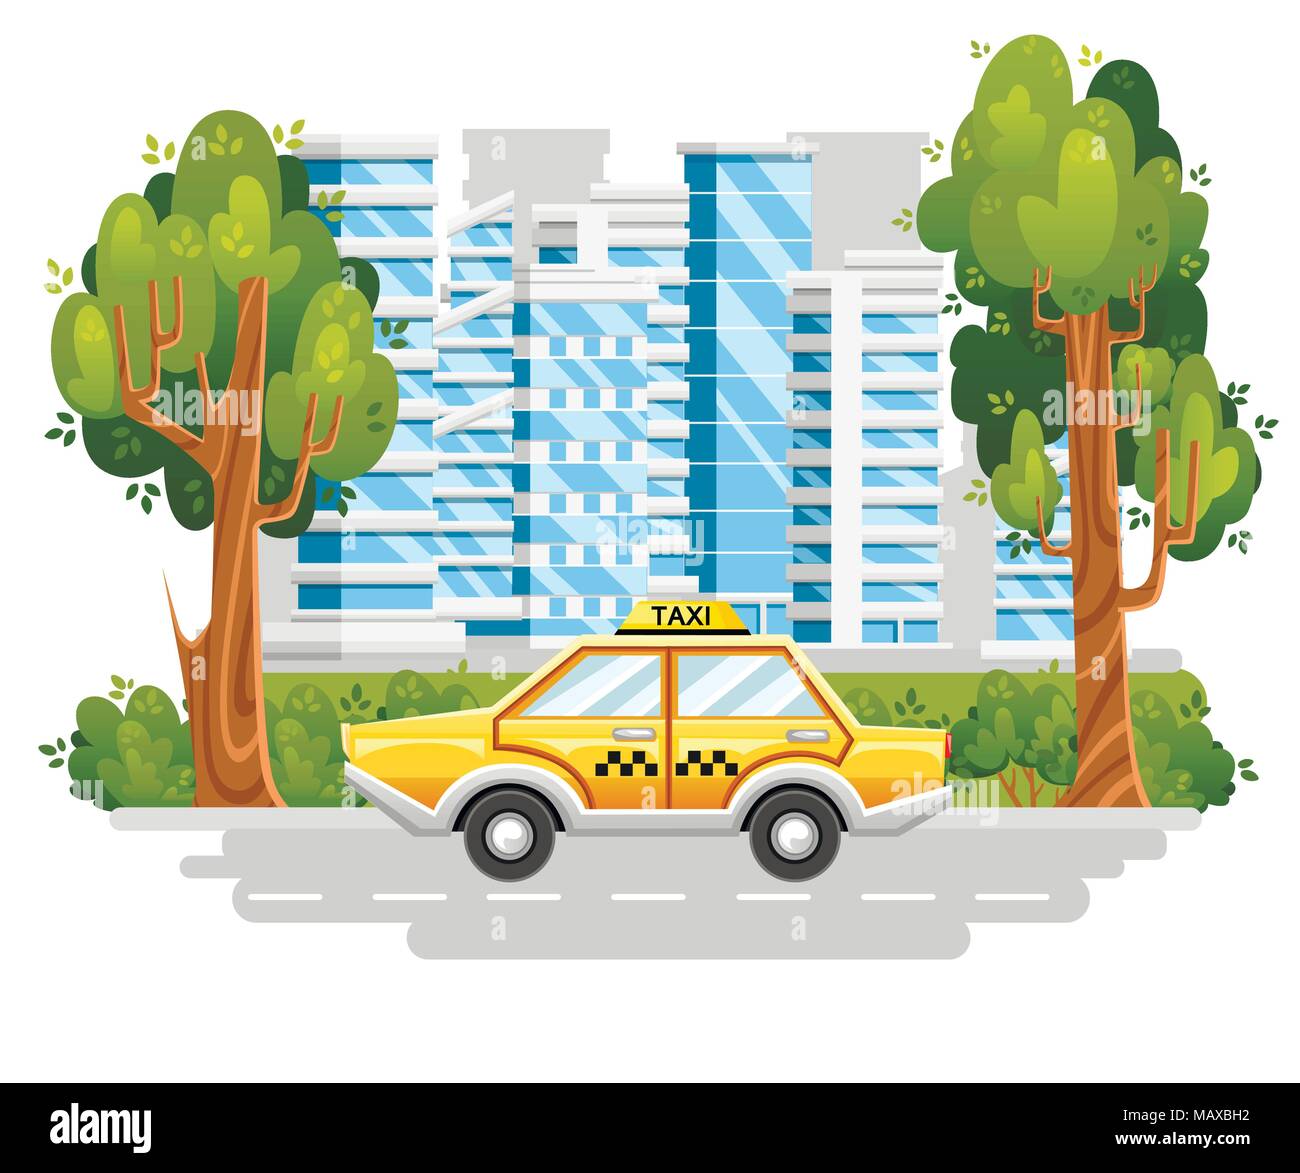 Yellow taxi car. Taxi service. Car on road in modern city. Blue buildings with green tree and bushes. Cartoon style design. Vector illustration isolat Stock Vector